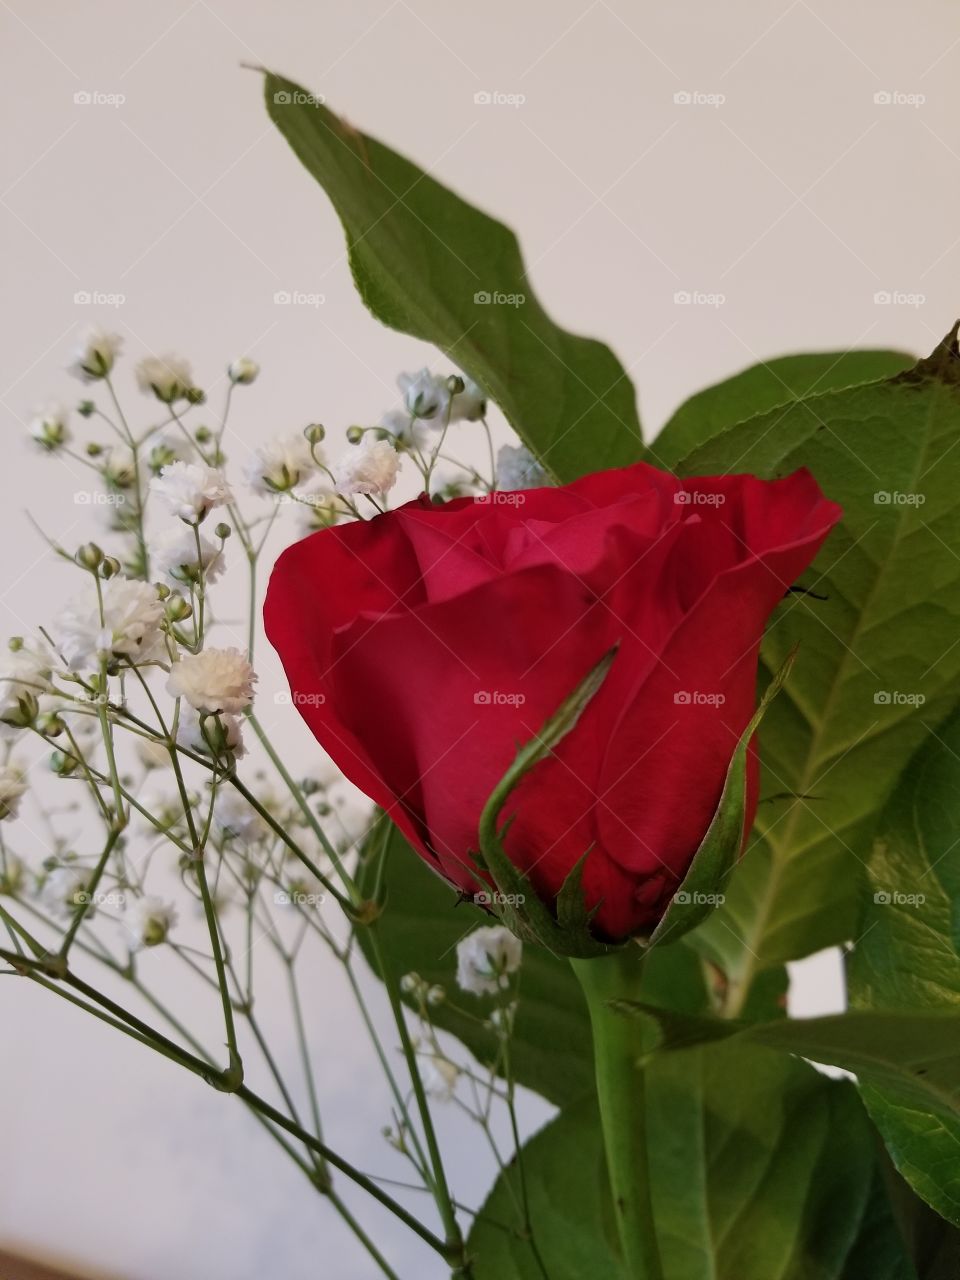 single red rose with foliage and baby's breath.